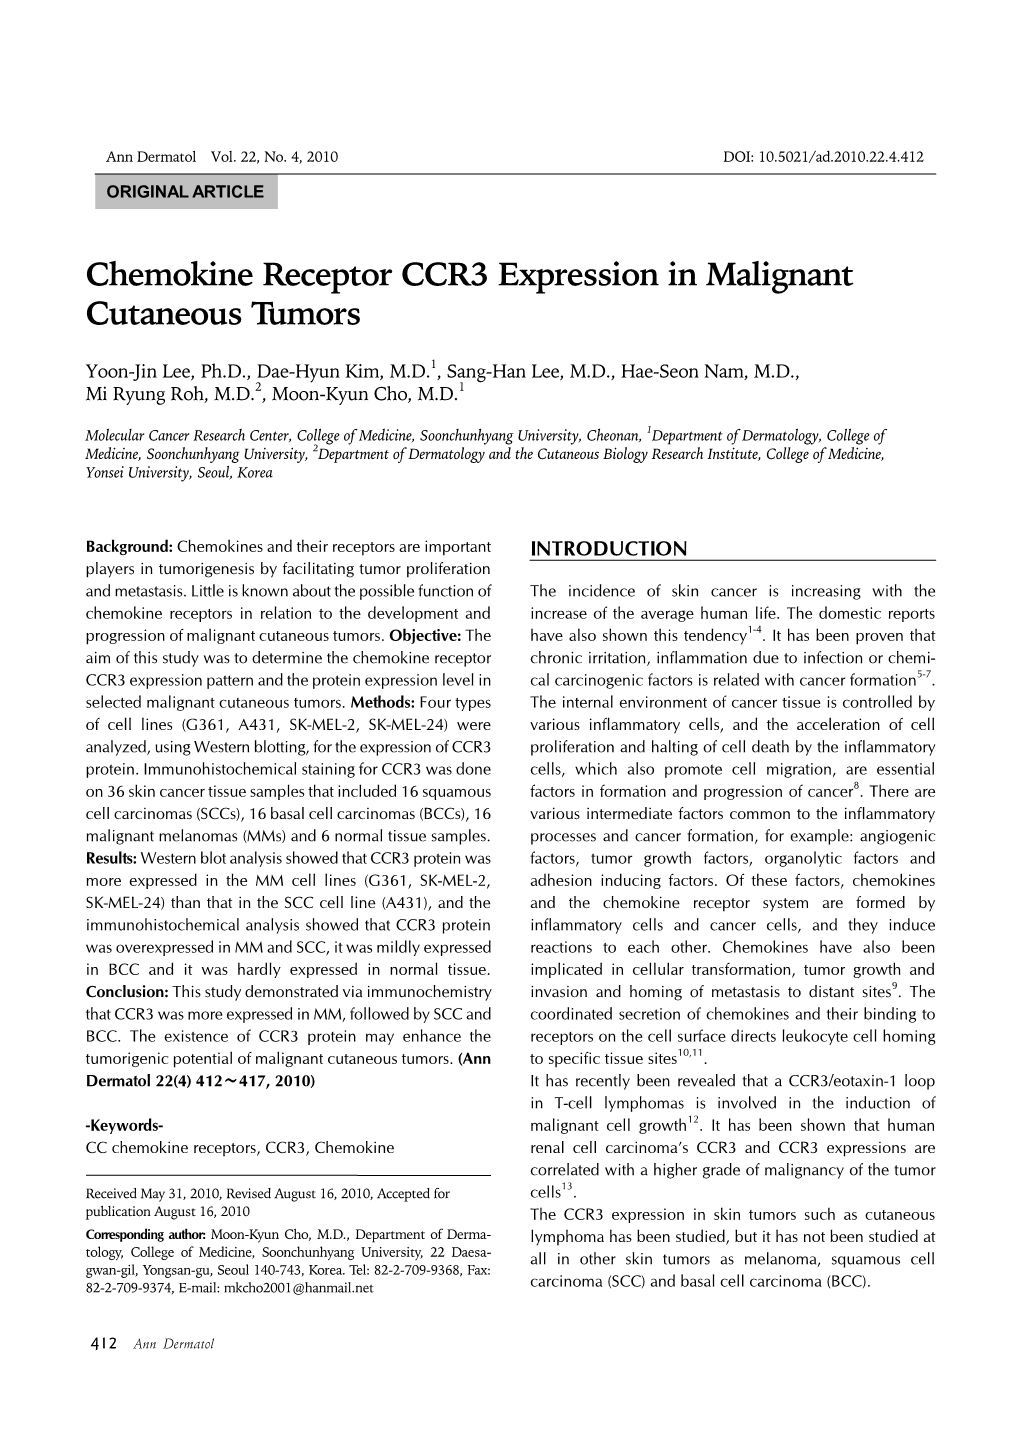 Chemokine Receptor CCR3 Expression in Malignant Cutaneous Tumors